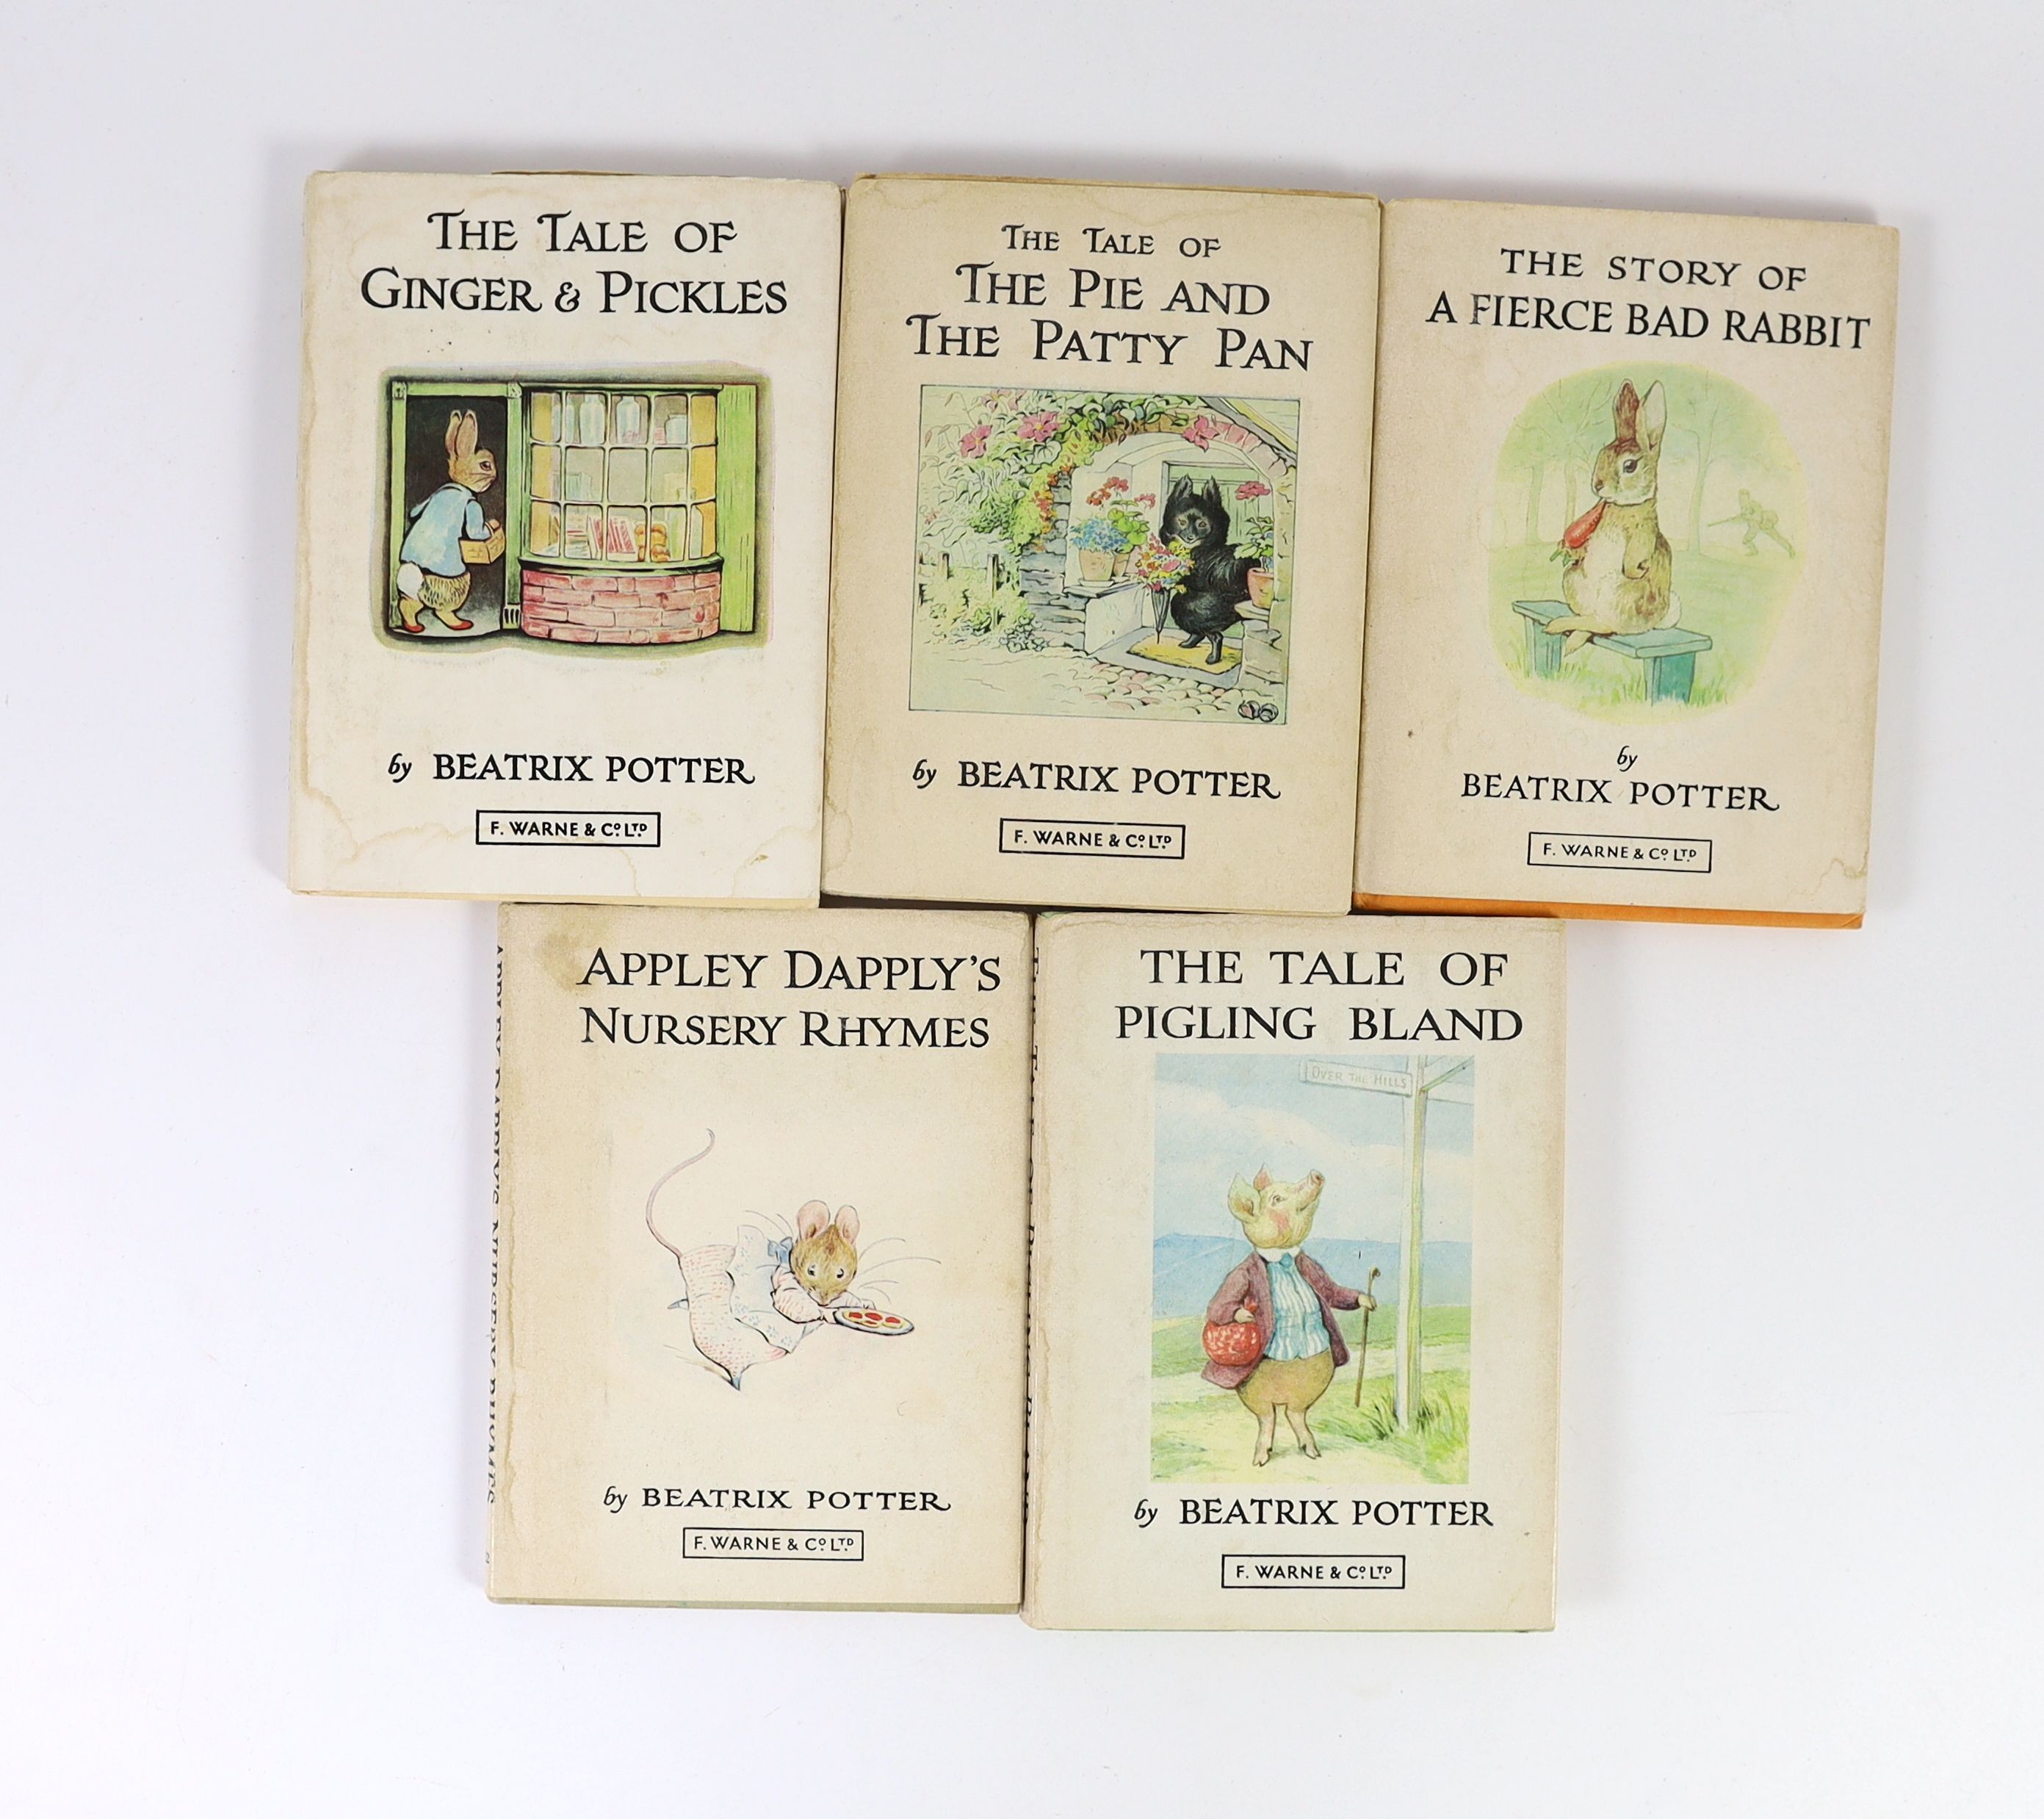 Potter, Beatrix - The Tale of Squirrel Nutkin. Early edition. Numerous illustrated plates. Original paper boards with pictorial and letters direct. 16mo. Frederick Warne and Co., London, 1903, First two printings didn’t